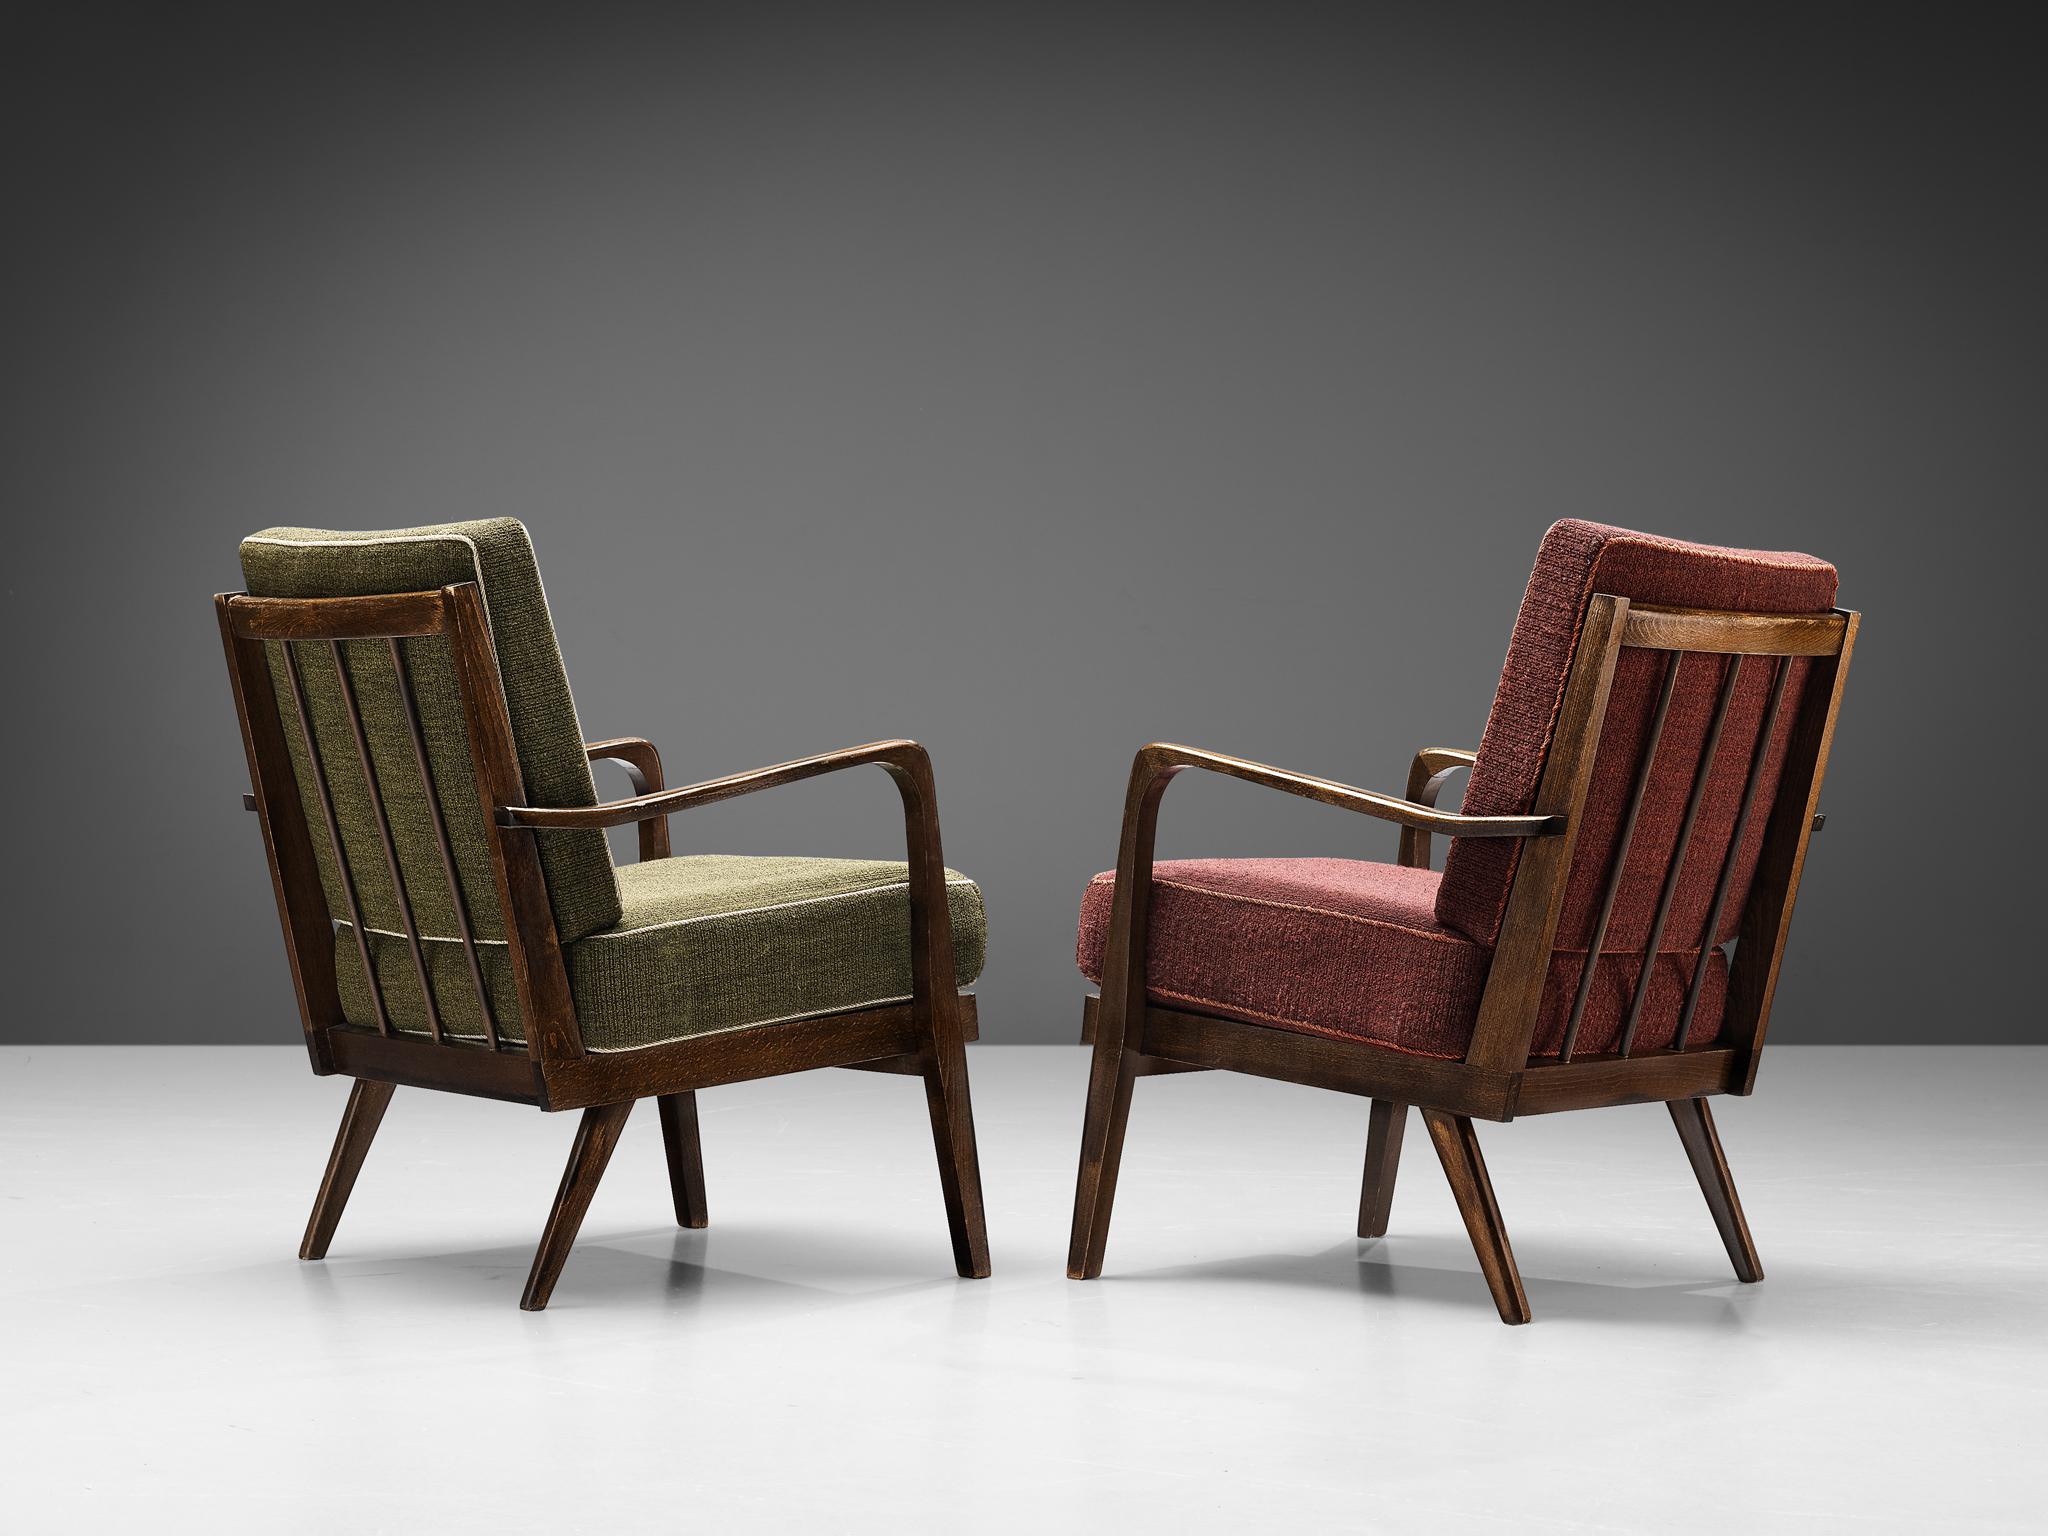 Pair of lounge chairs, fabric, stained wood, Denmark, 1950s.

This stately and well-executed Danish high back chairs show an exquisite level of craftsmanship. The lines and finishes in this set are both curvy and crisp. The frame shows traits of the